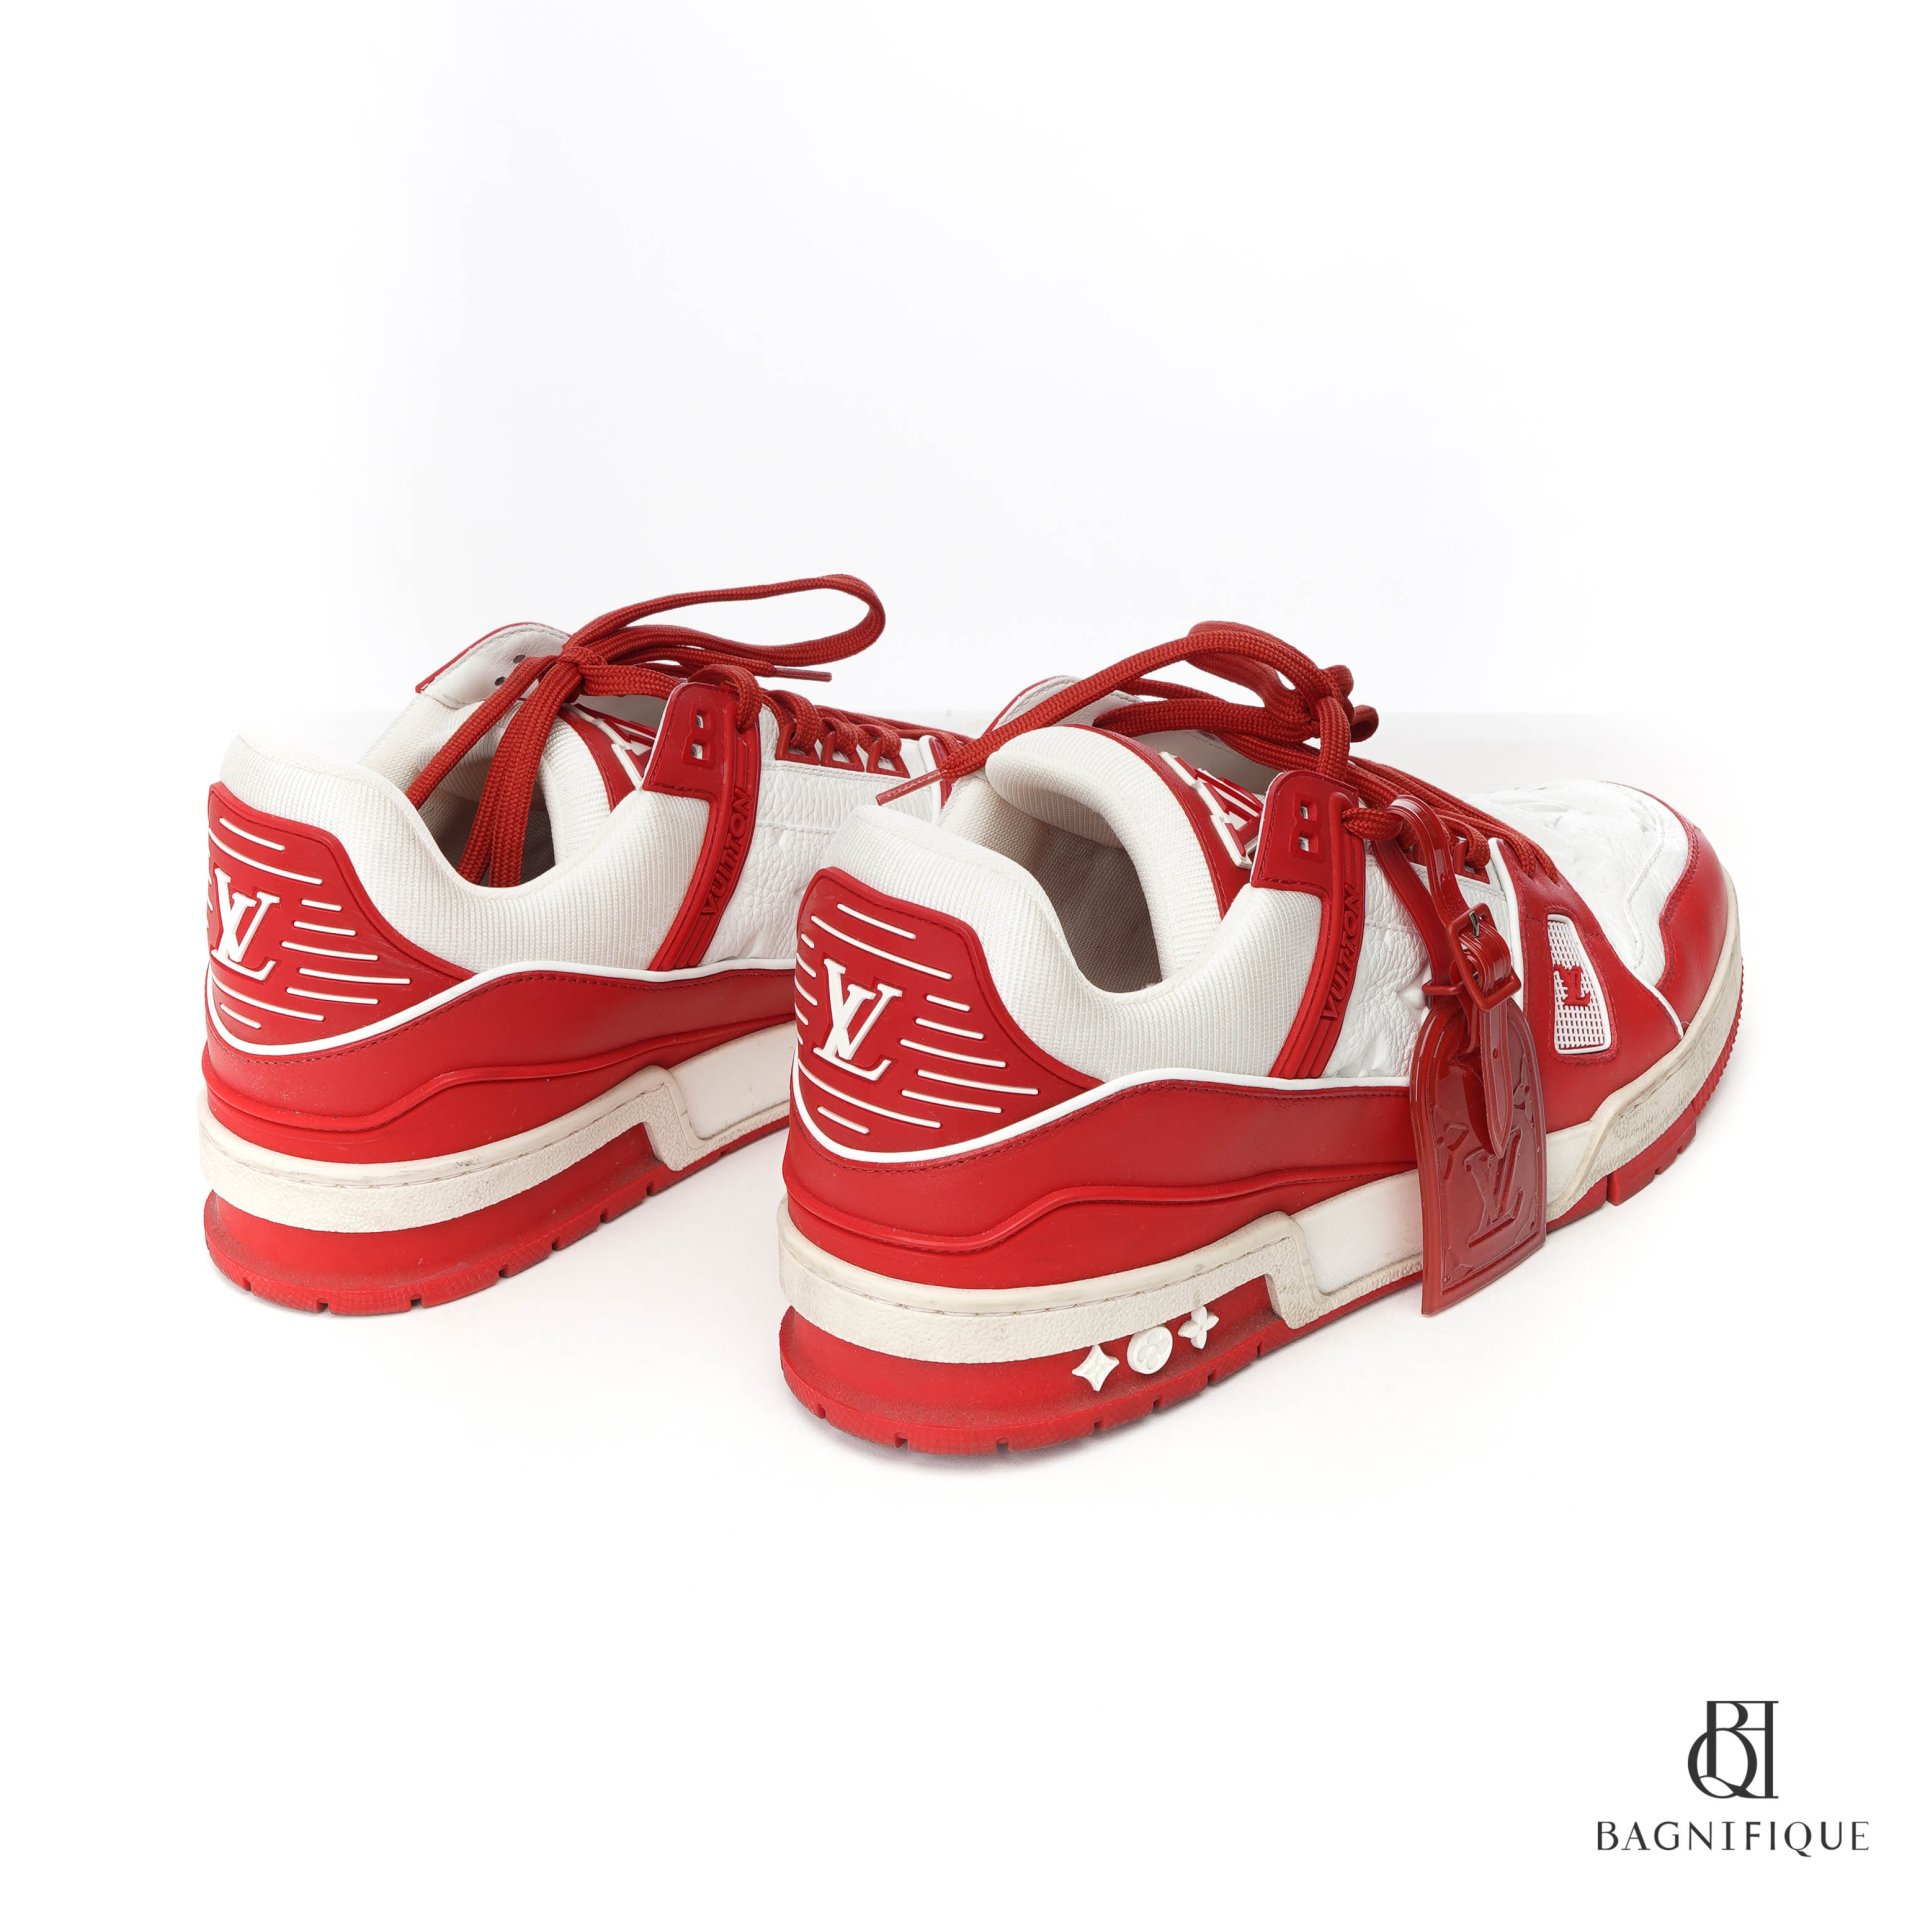 LV SNEAKERS 9.5 WHITE RED - bagnifiquethailand